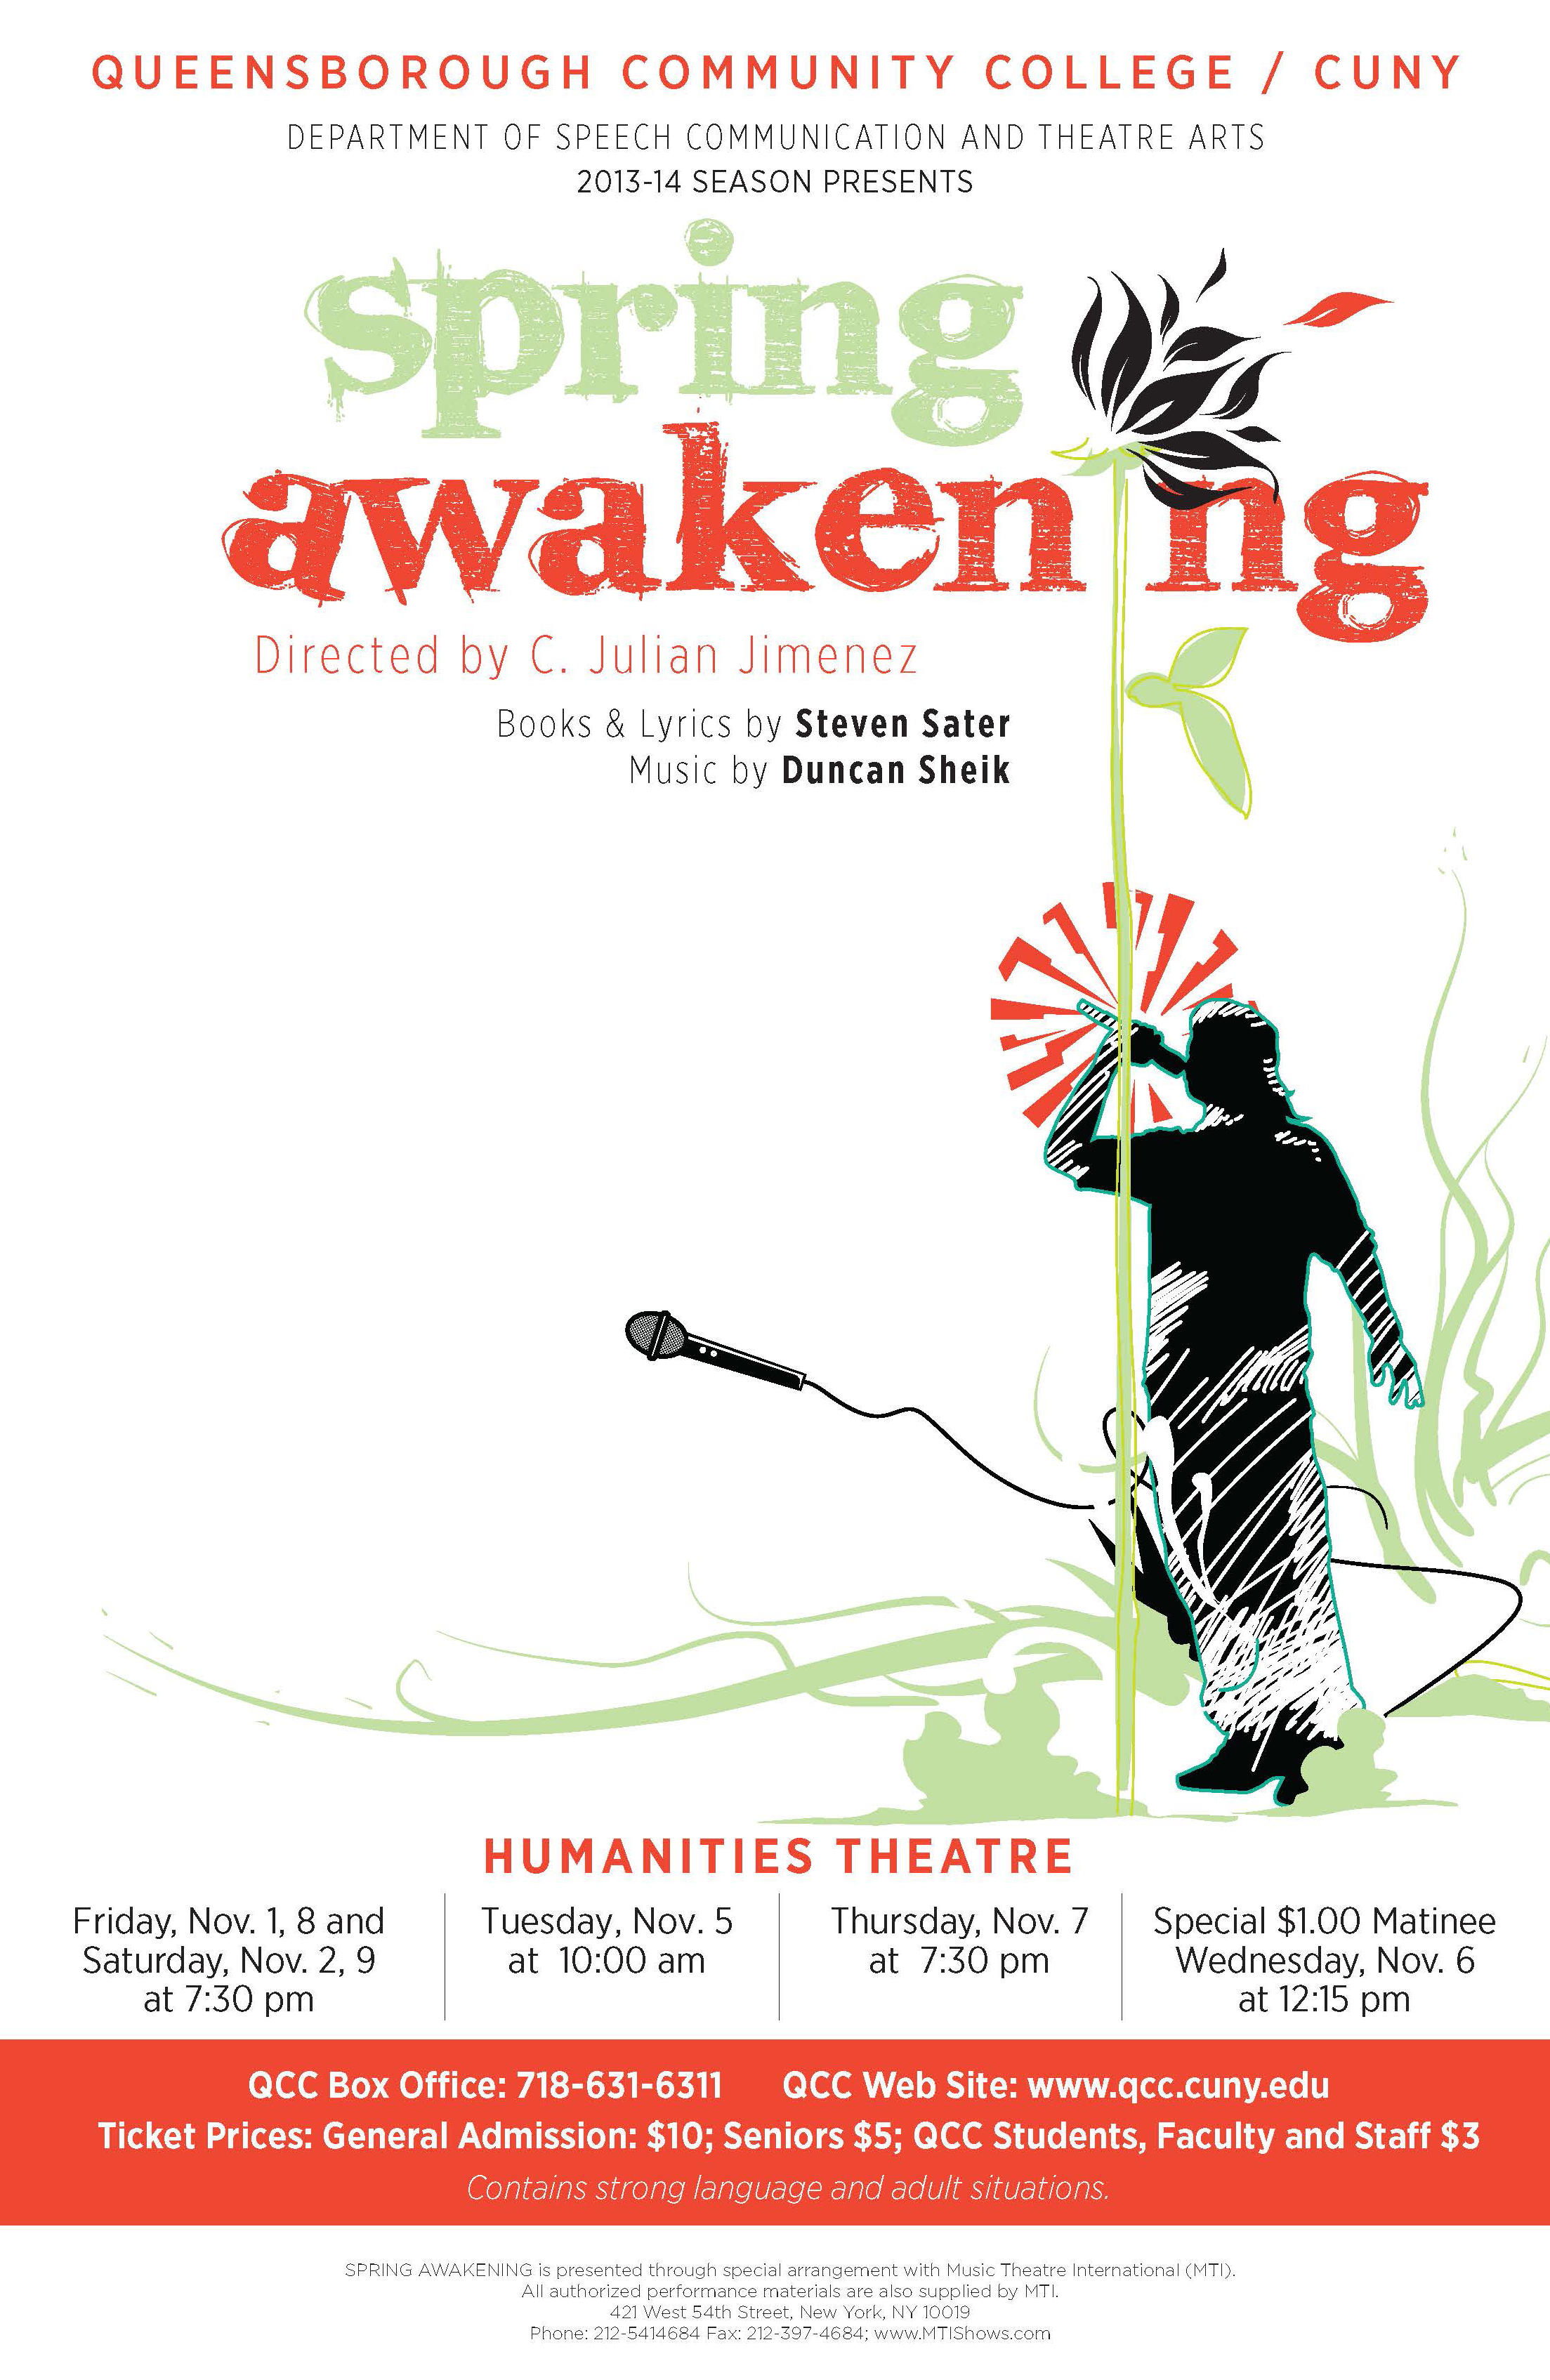 This is a poster for the past fall 2013 production of ‘Spring Awakening’, books and lyrics by Steven Sater, music by Duncan Sheik, and directed by Professor Jimenez. The poster displays a solo rock singer, singing into a microphone.